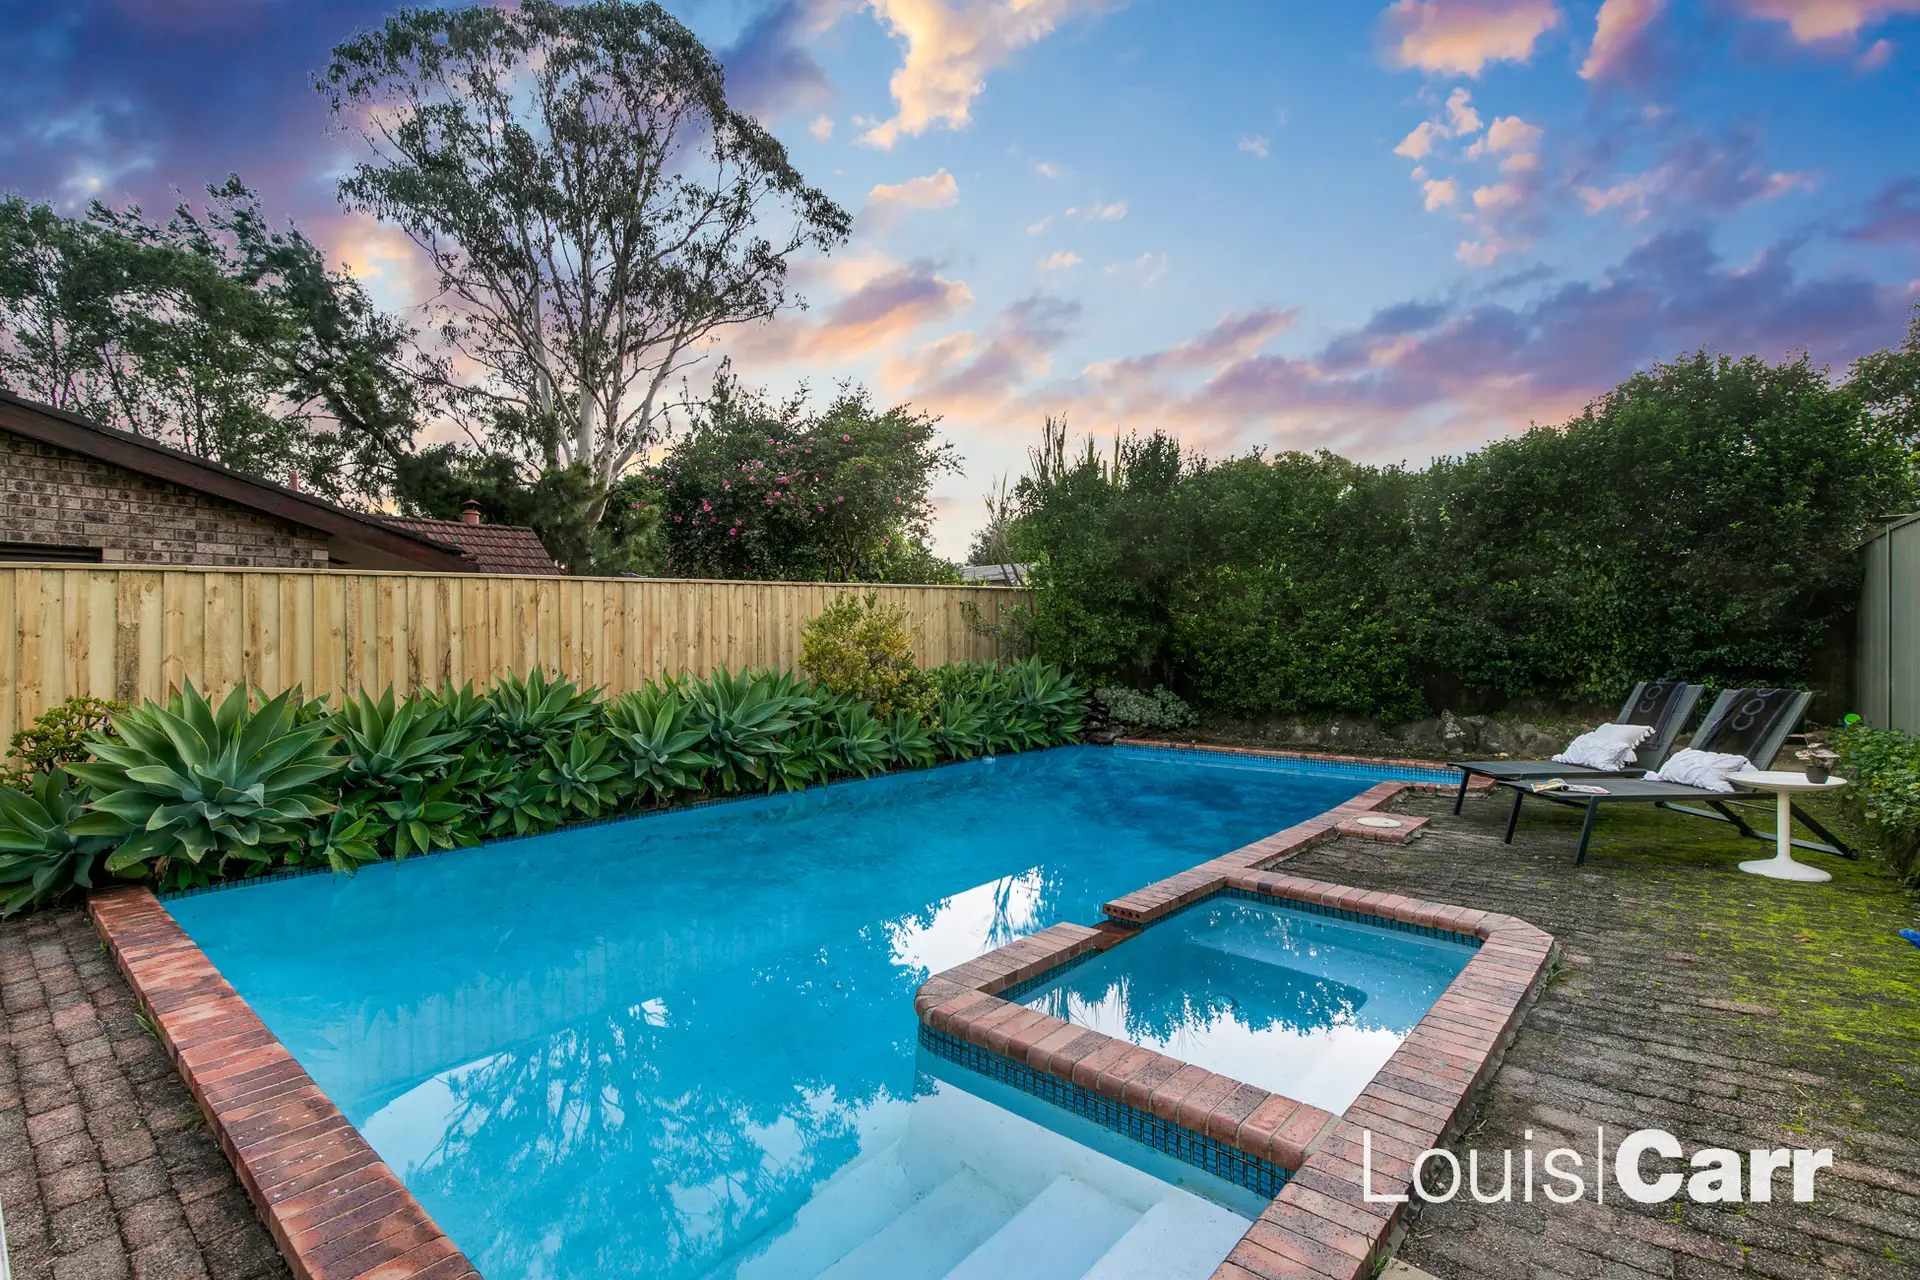 Photo #8: 7 Tamarisk Crescent, Cherrybrook - Sold by Louis Carr Real Estate